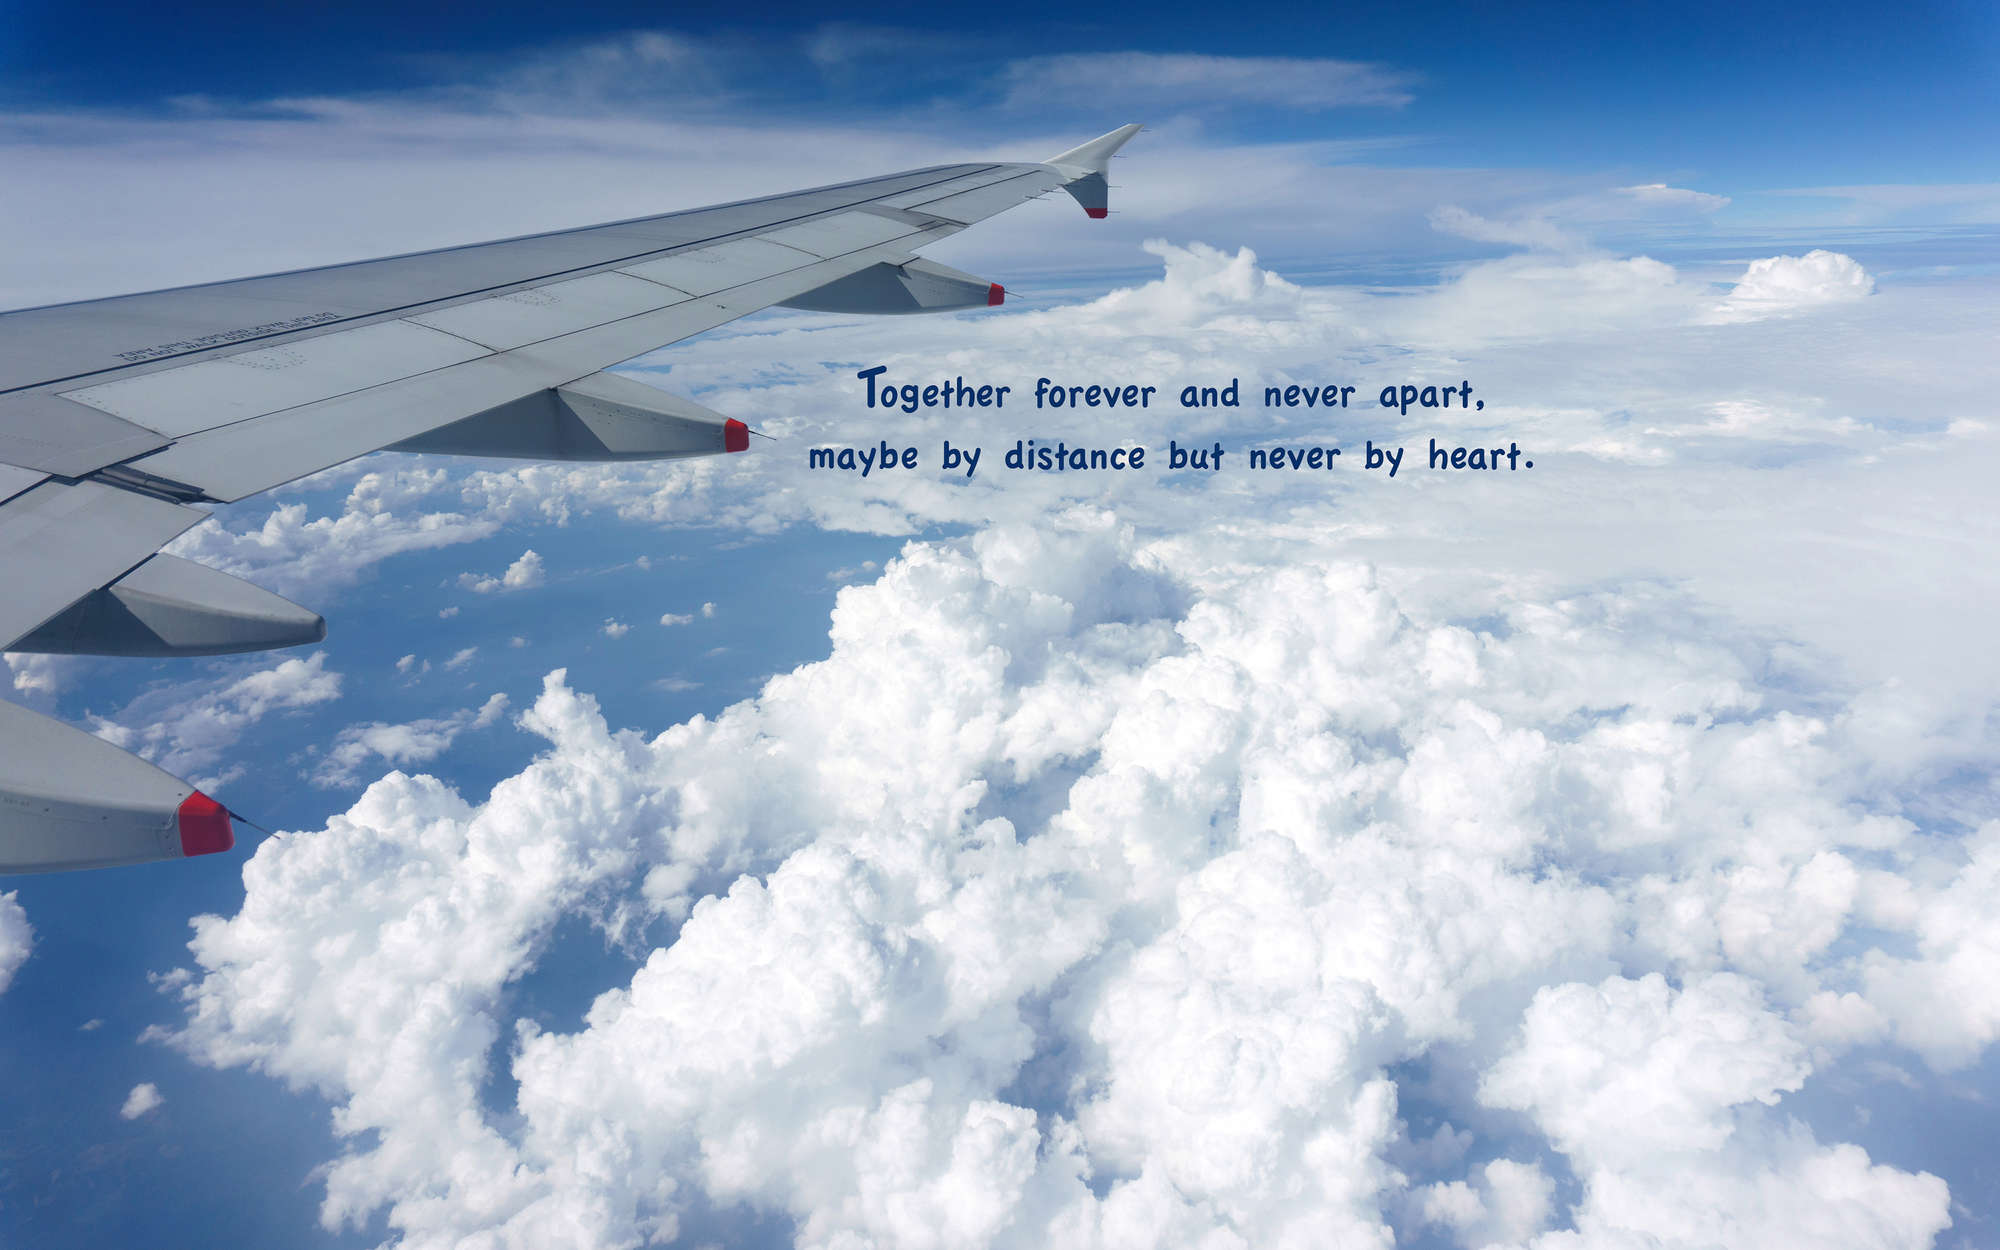             Photo wallpaper Airplane above the clouds with lettering - mother-of-pearl smooth non-woven
        